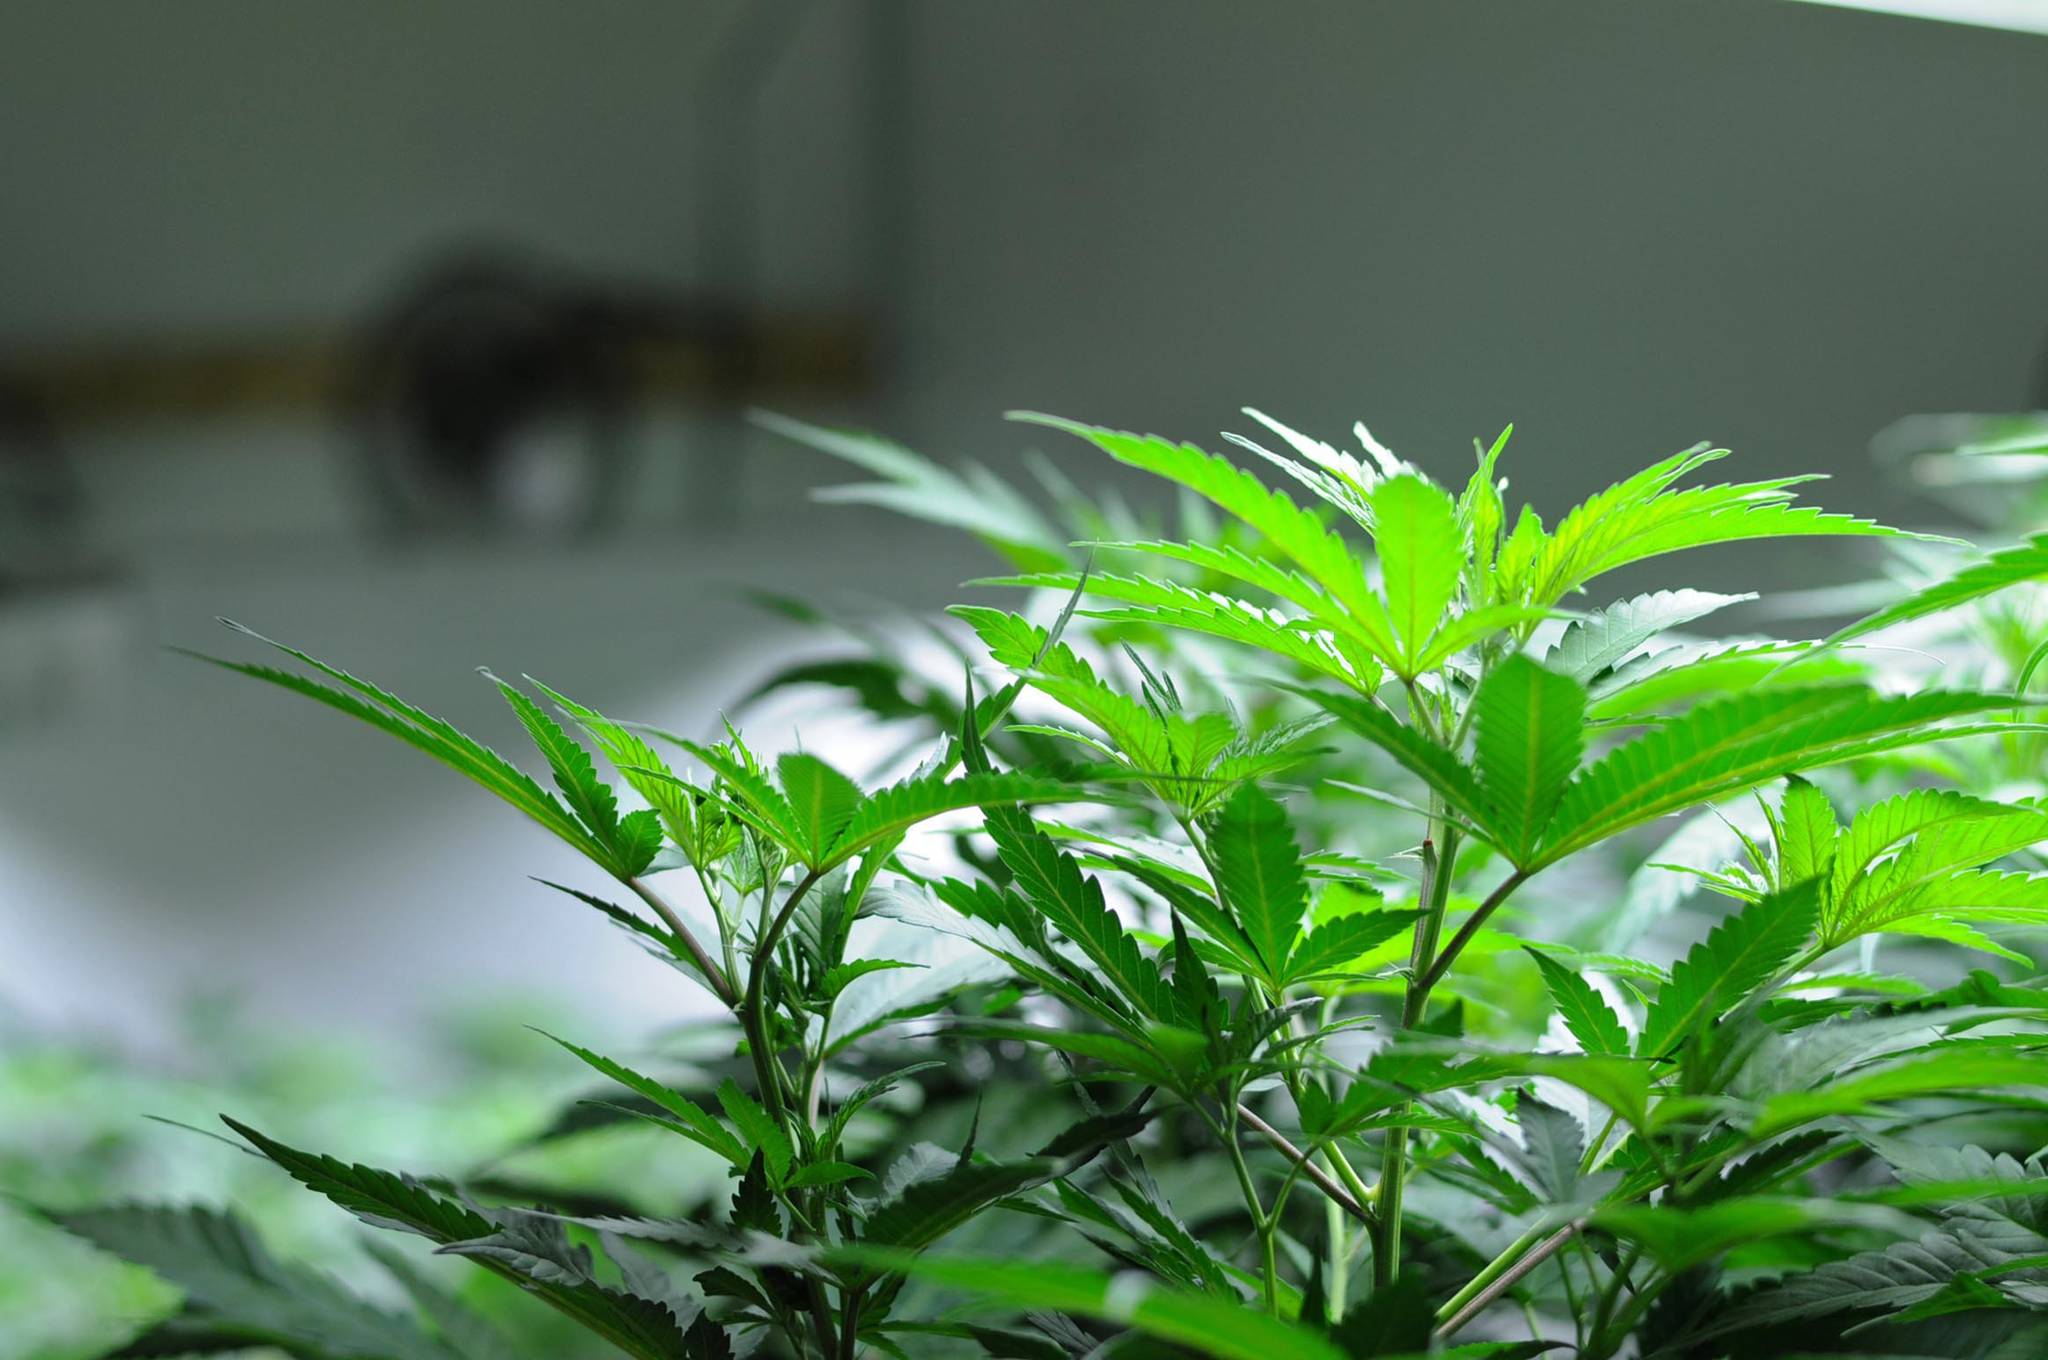 In this December 2016 photo, cannabis plants grow in a standard cultivation space inside Croy’s Enterprises near Soldotna, Alaska. (Peninsula Clarion file photo)